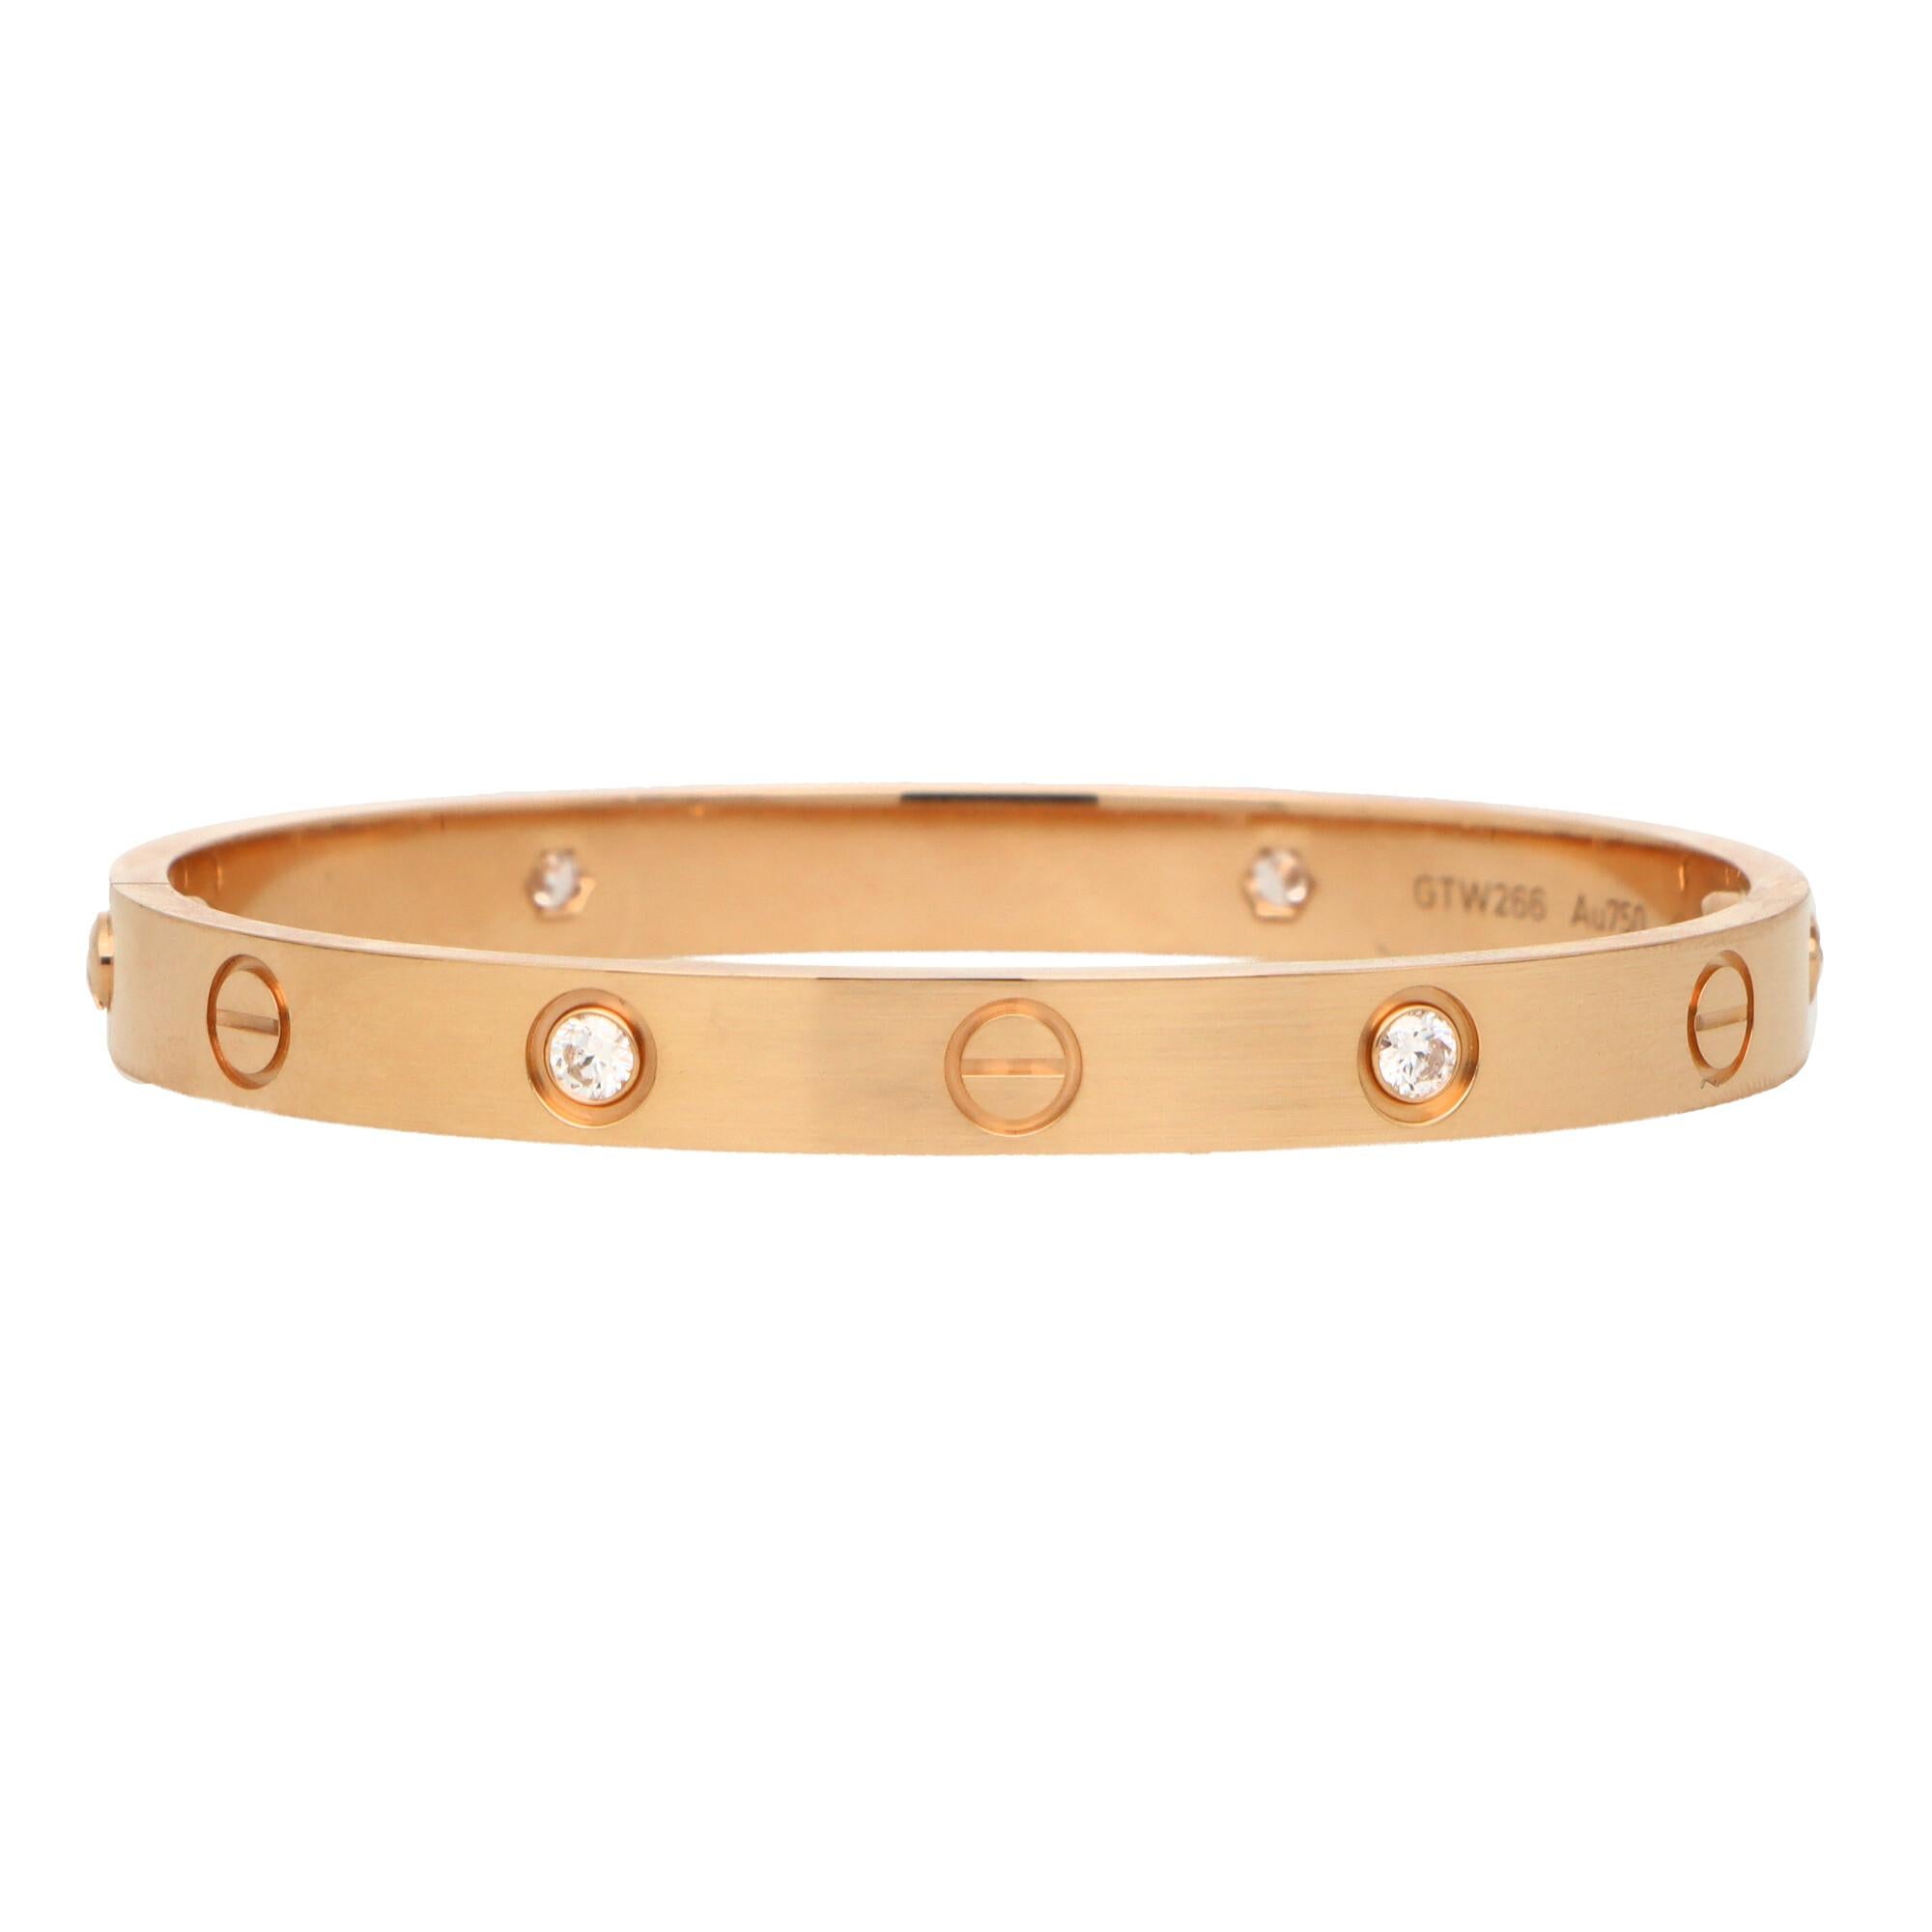 A classic four diamond Cartier Love bangle set in 18k rose gold.

The Love collection is a firm favourite of many mainly due to the simple, beautiful and elegant design. The bangle is composed of a 6-millimetre band with alternating diamonds and